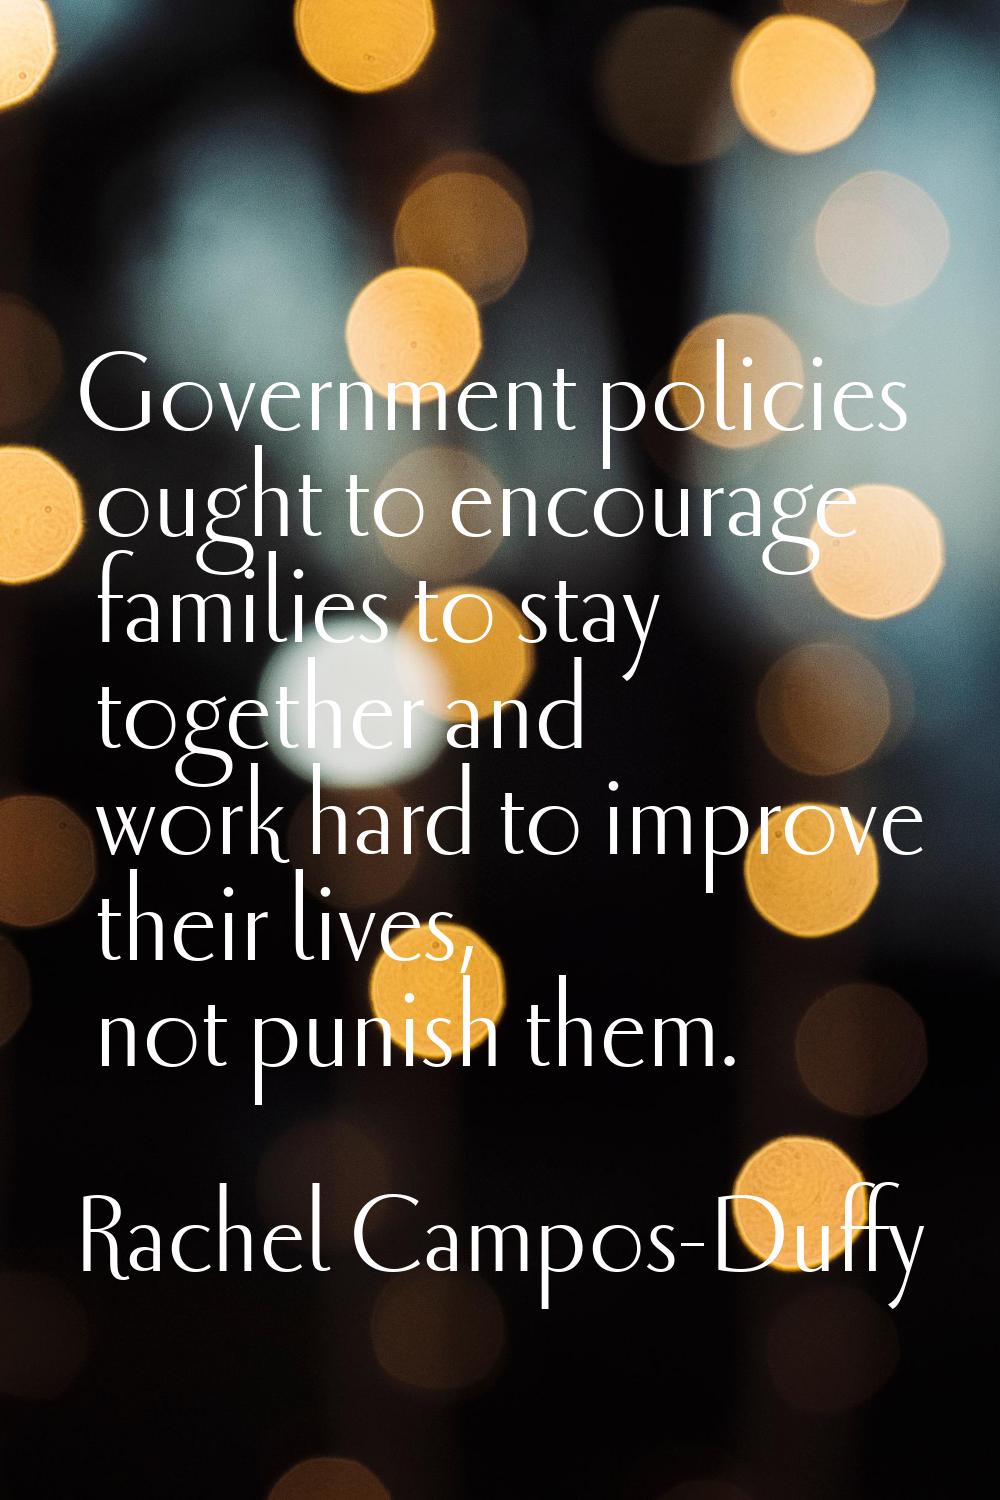 Government policies ought to encourage families to stay together and work hard to improve their liv